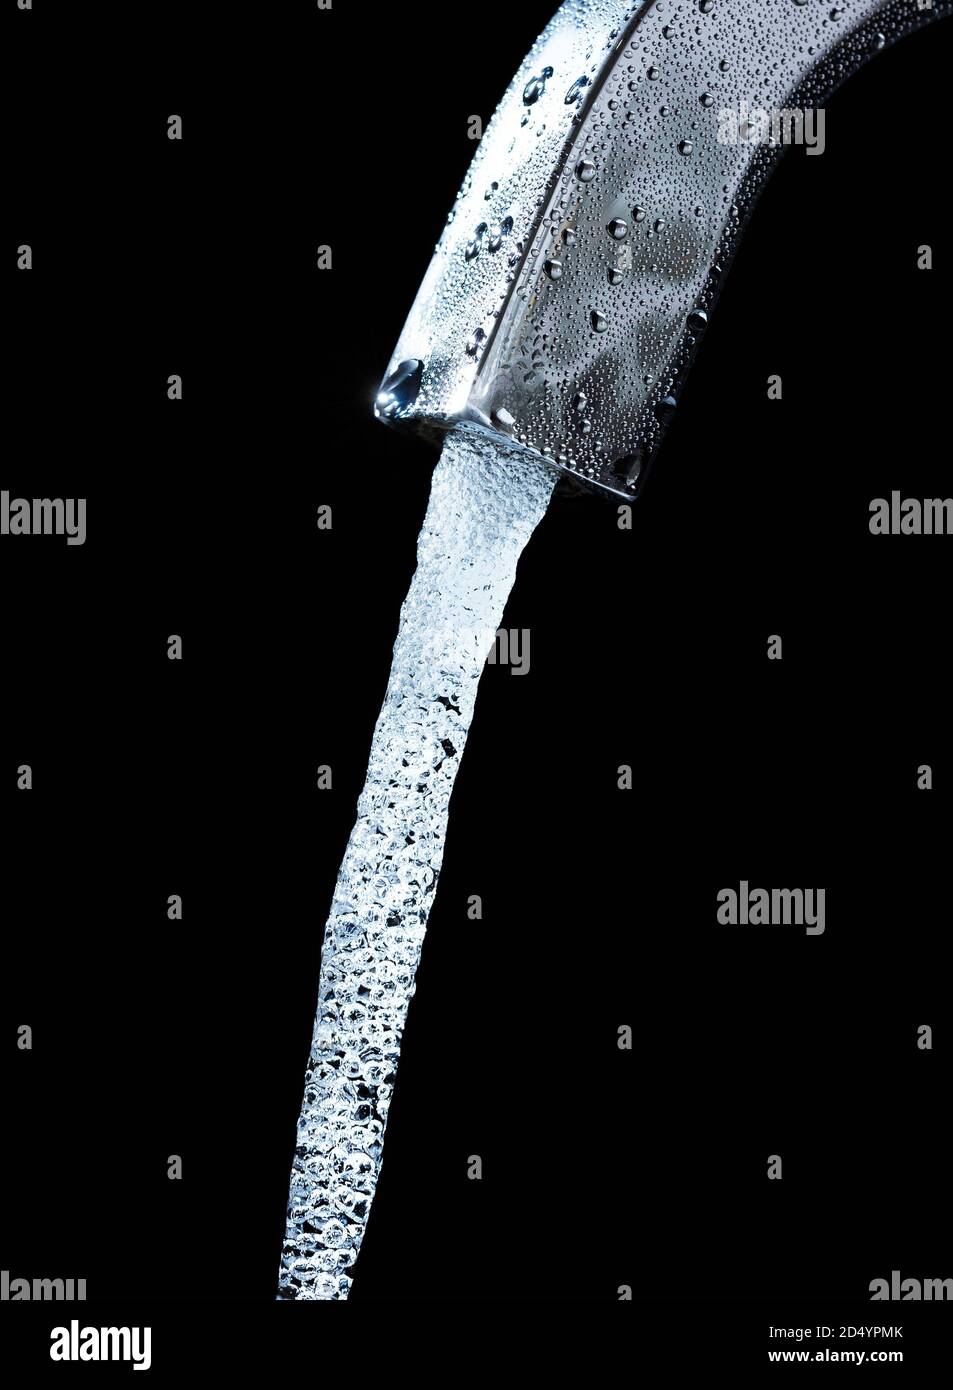 Clean, cold water pours from a misted tap, against a black background. Stock Photo